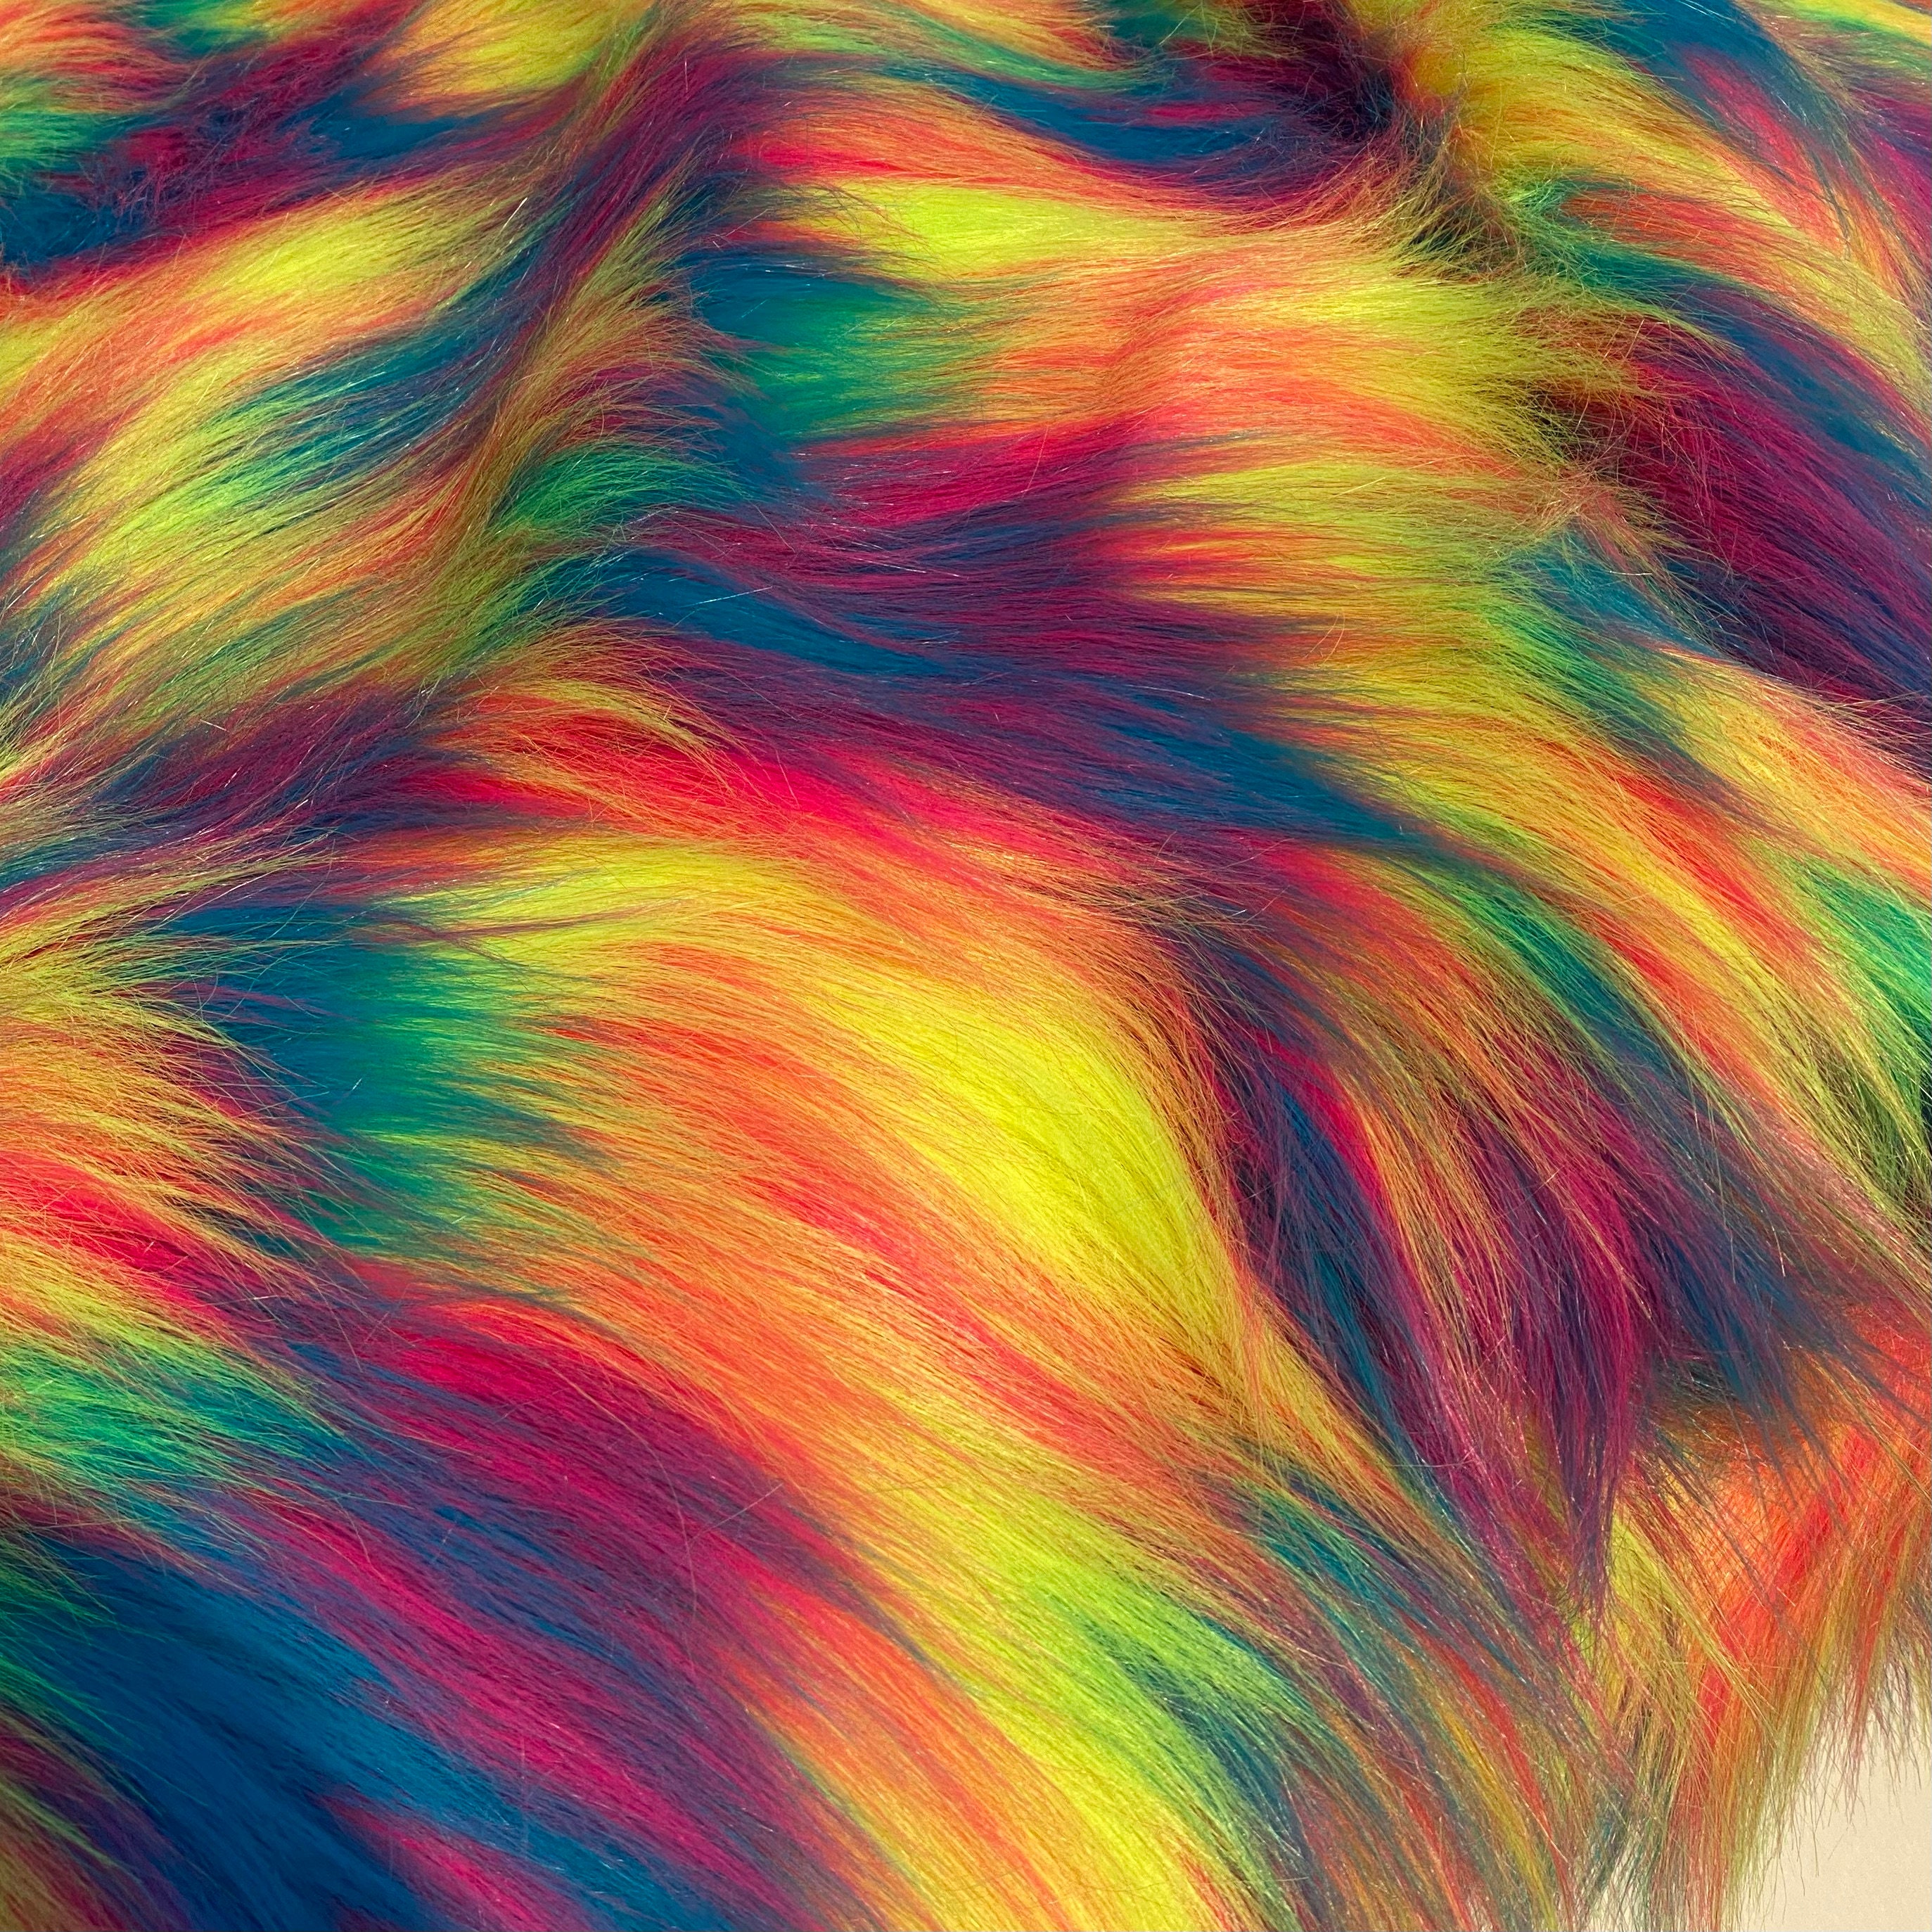 Faux Fur Fabric Furry Material,10mm Pile Plush Soft Cuddly Luxury